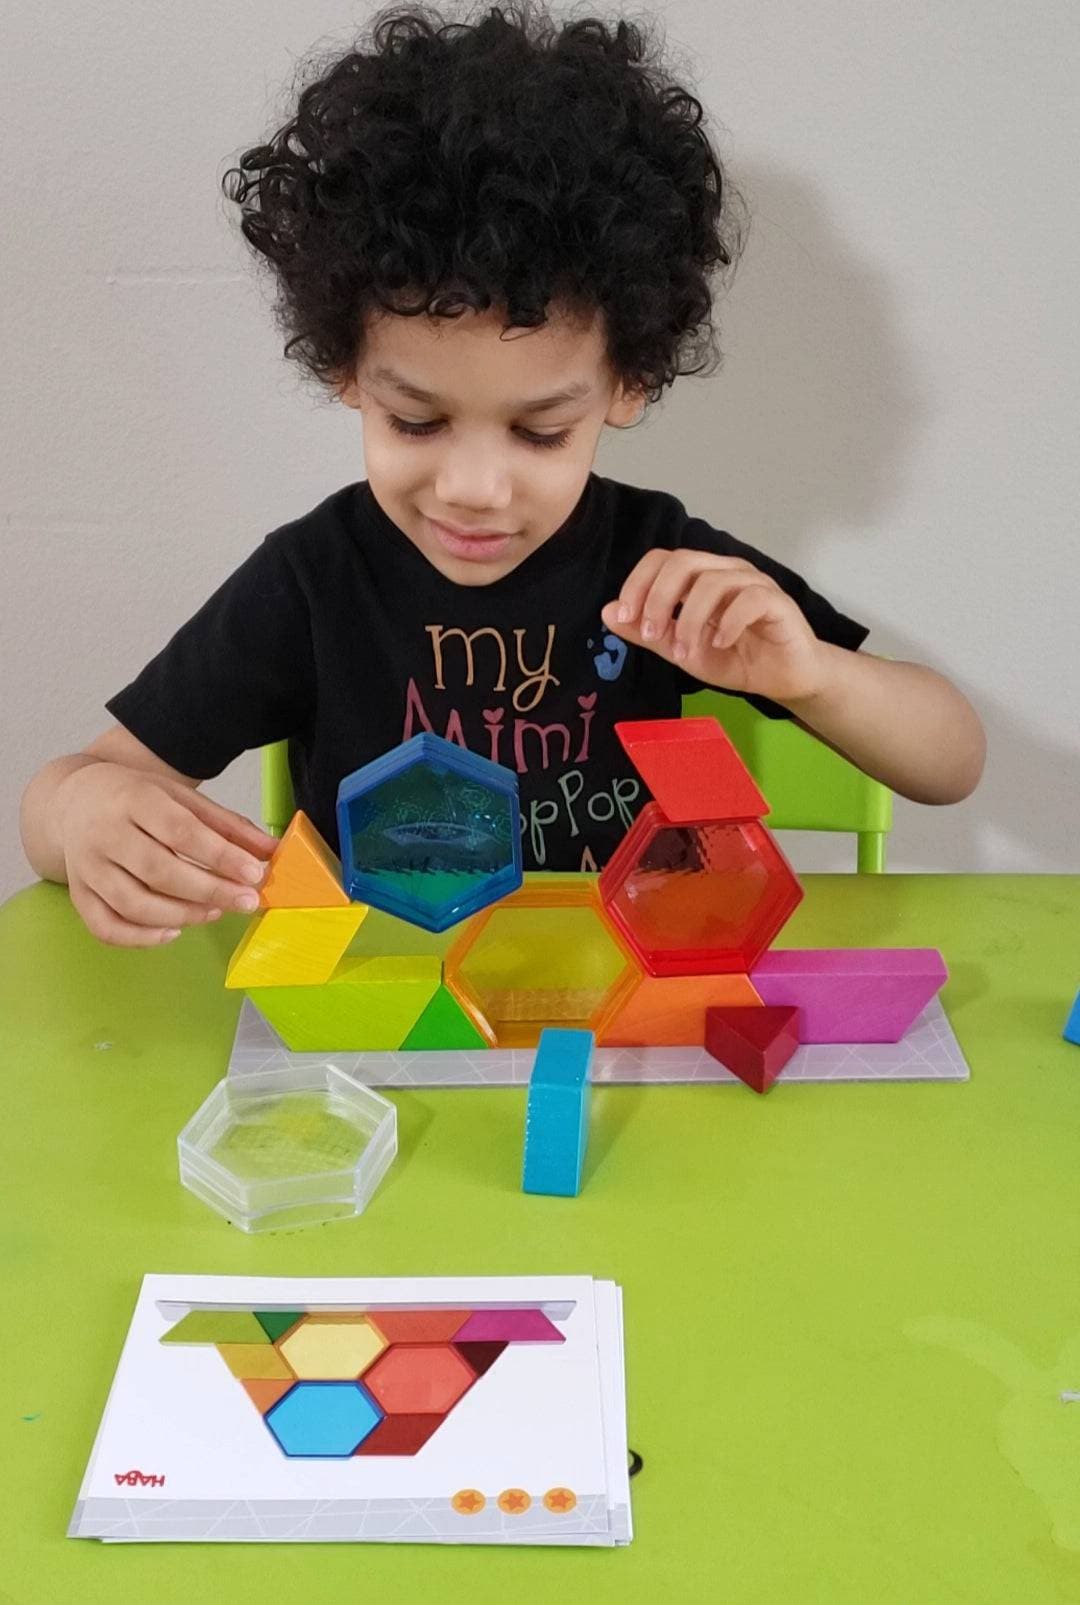 HABA Stacking Game Color Crystals